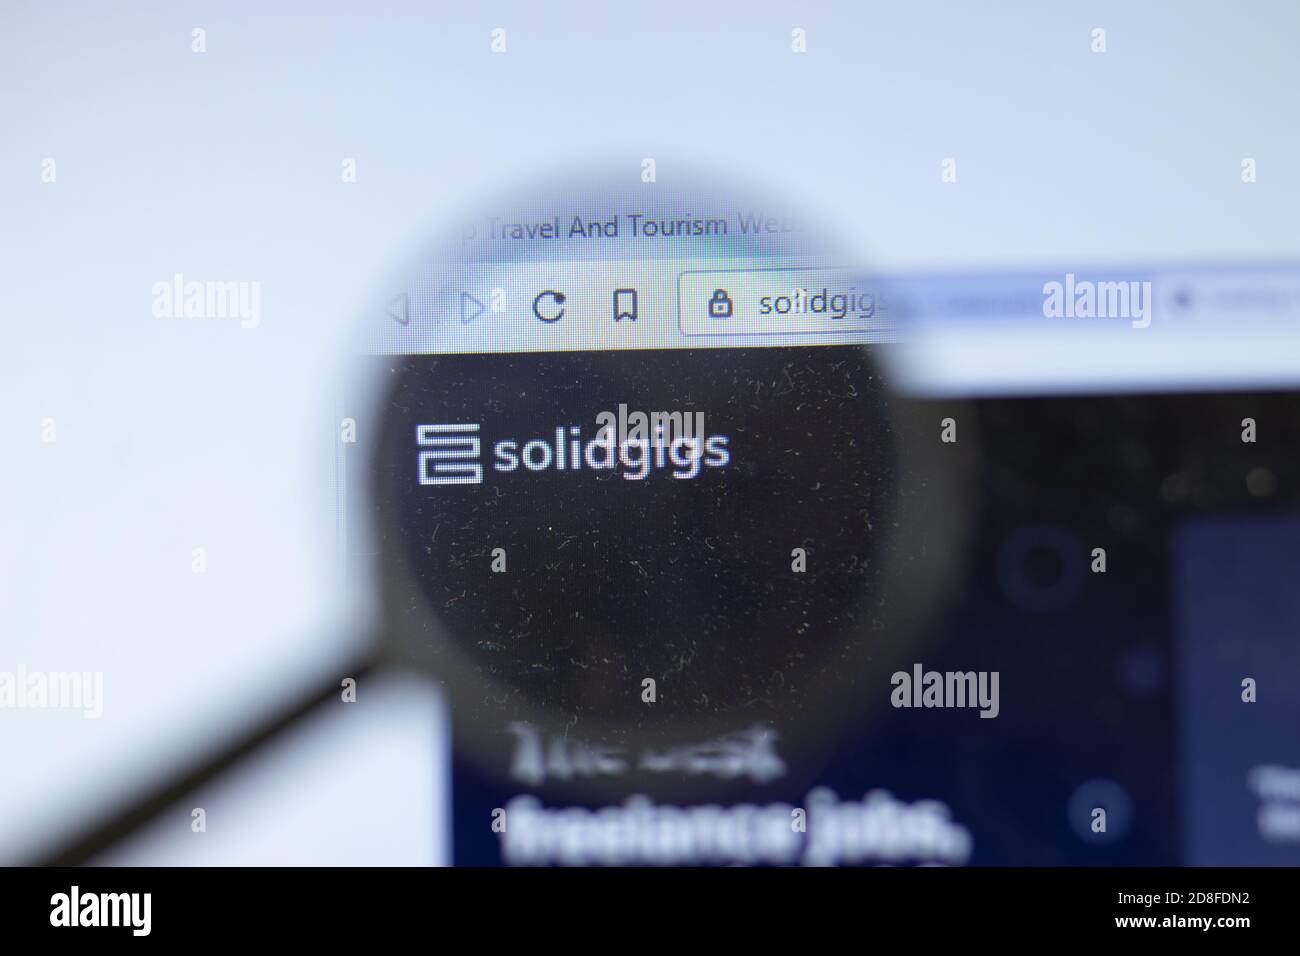 New York, USA - 26 October 2020: solidgigs company website with logo close up, Illustrative Editorial Stock Photo